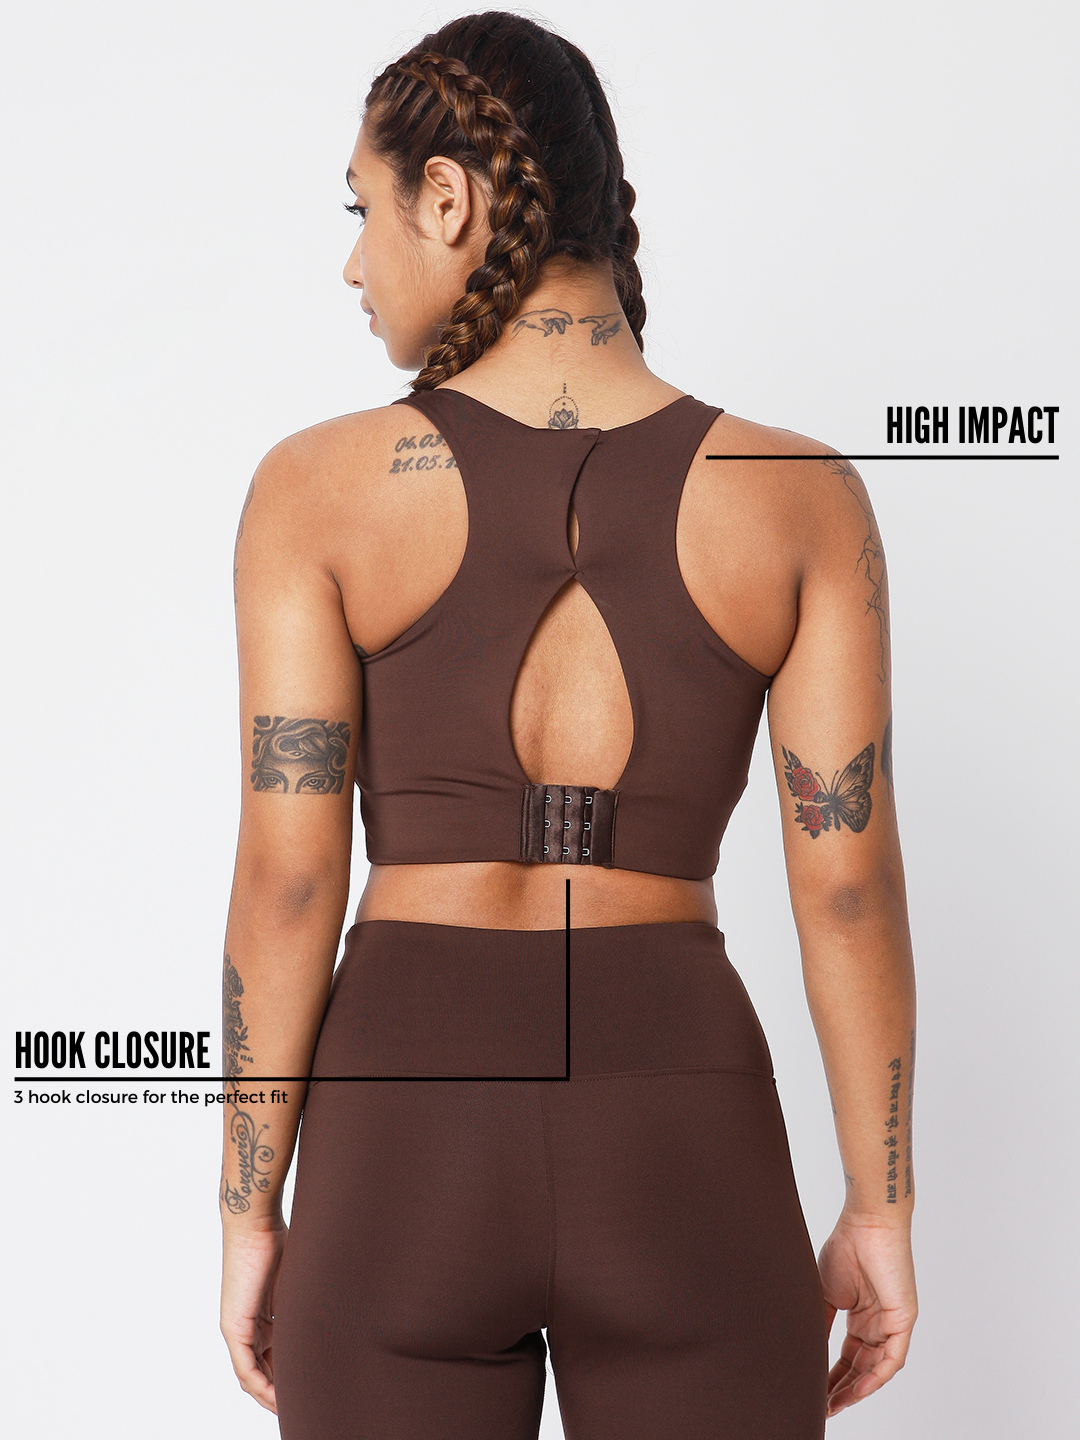 High Impact Action Bra With Clasp Java